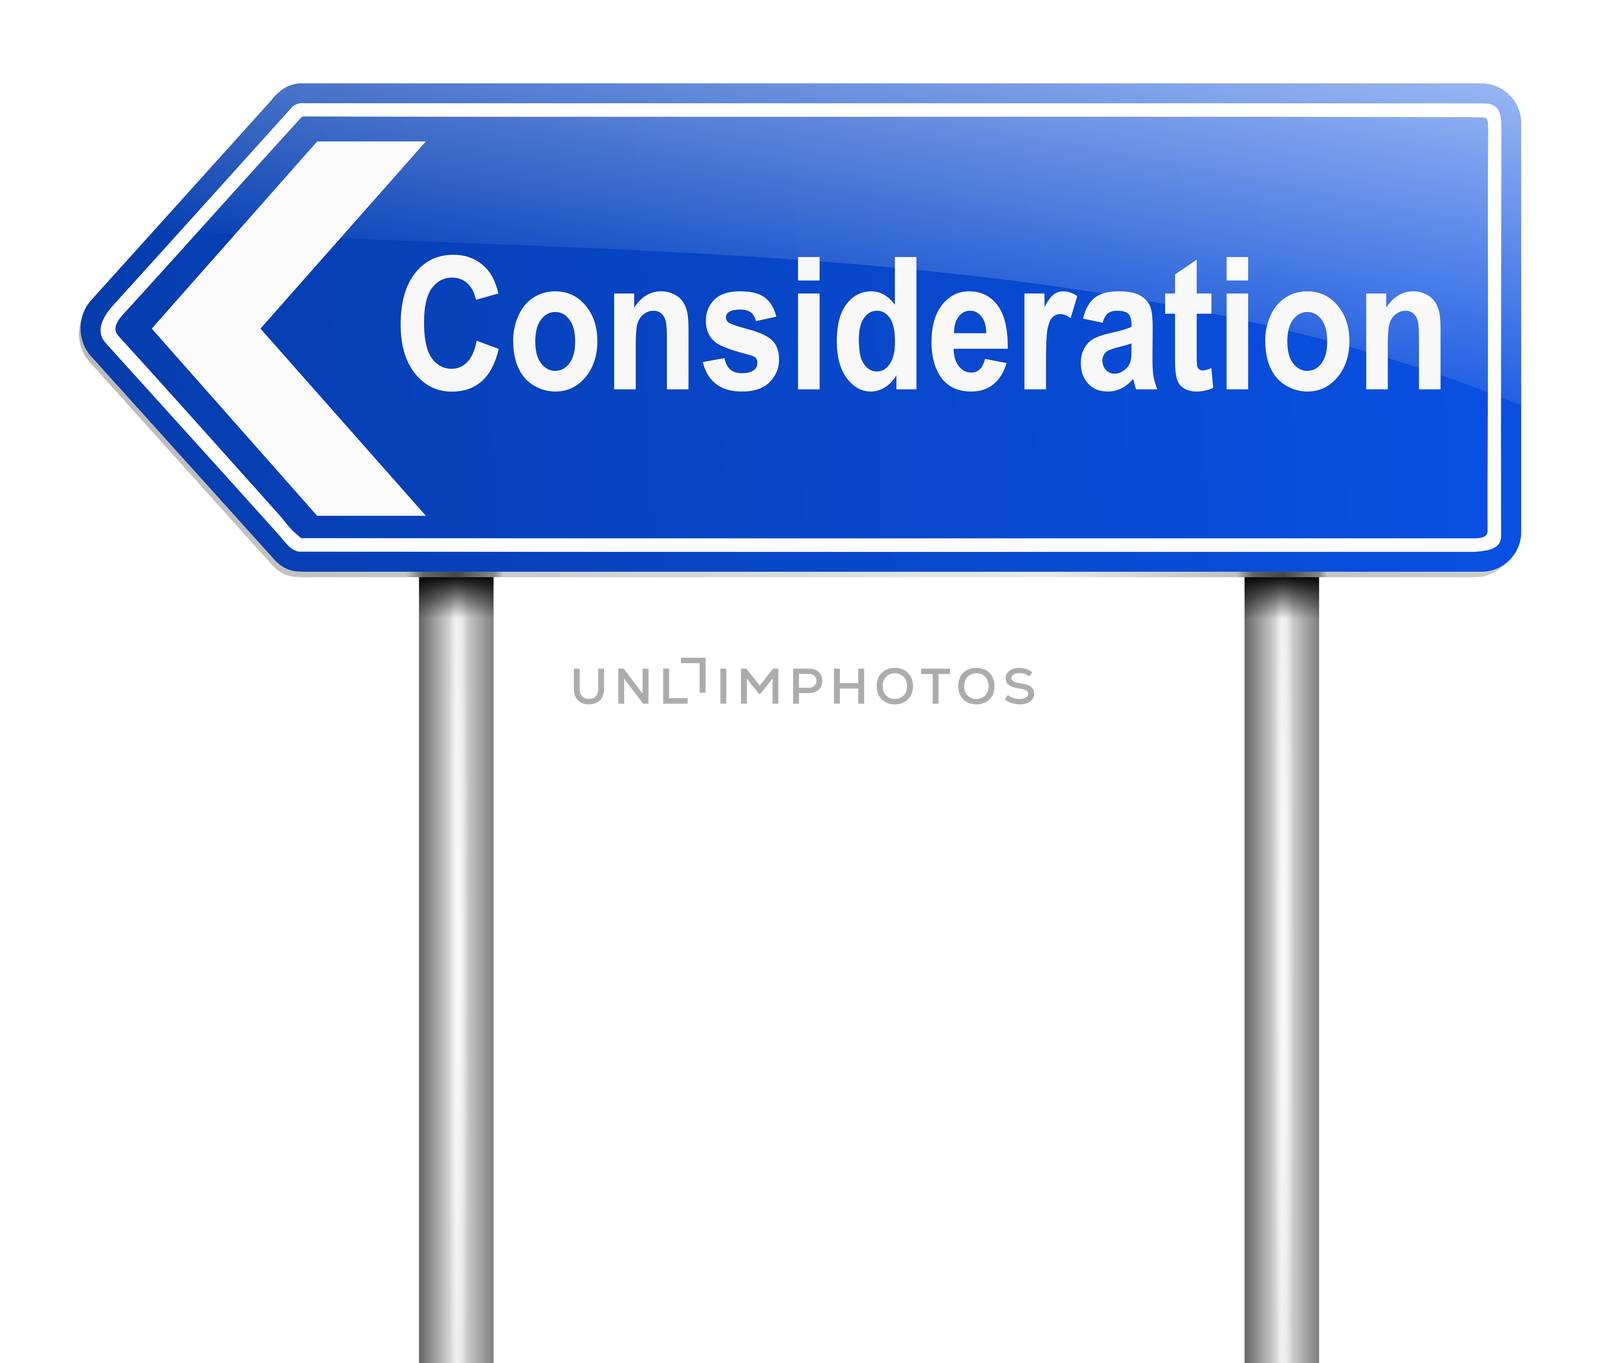 Illustration depicting a sign with a consideraiton concept.